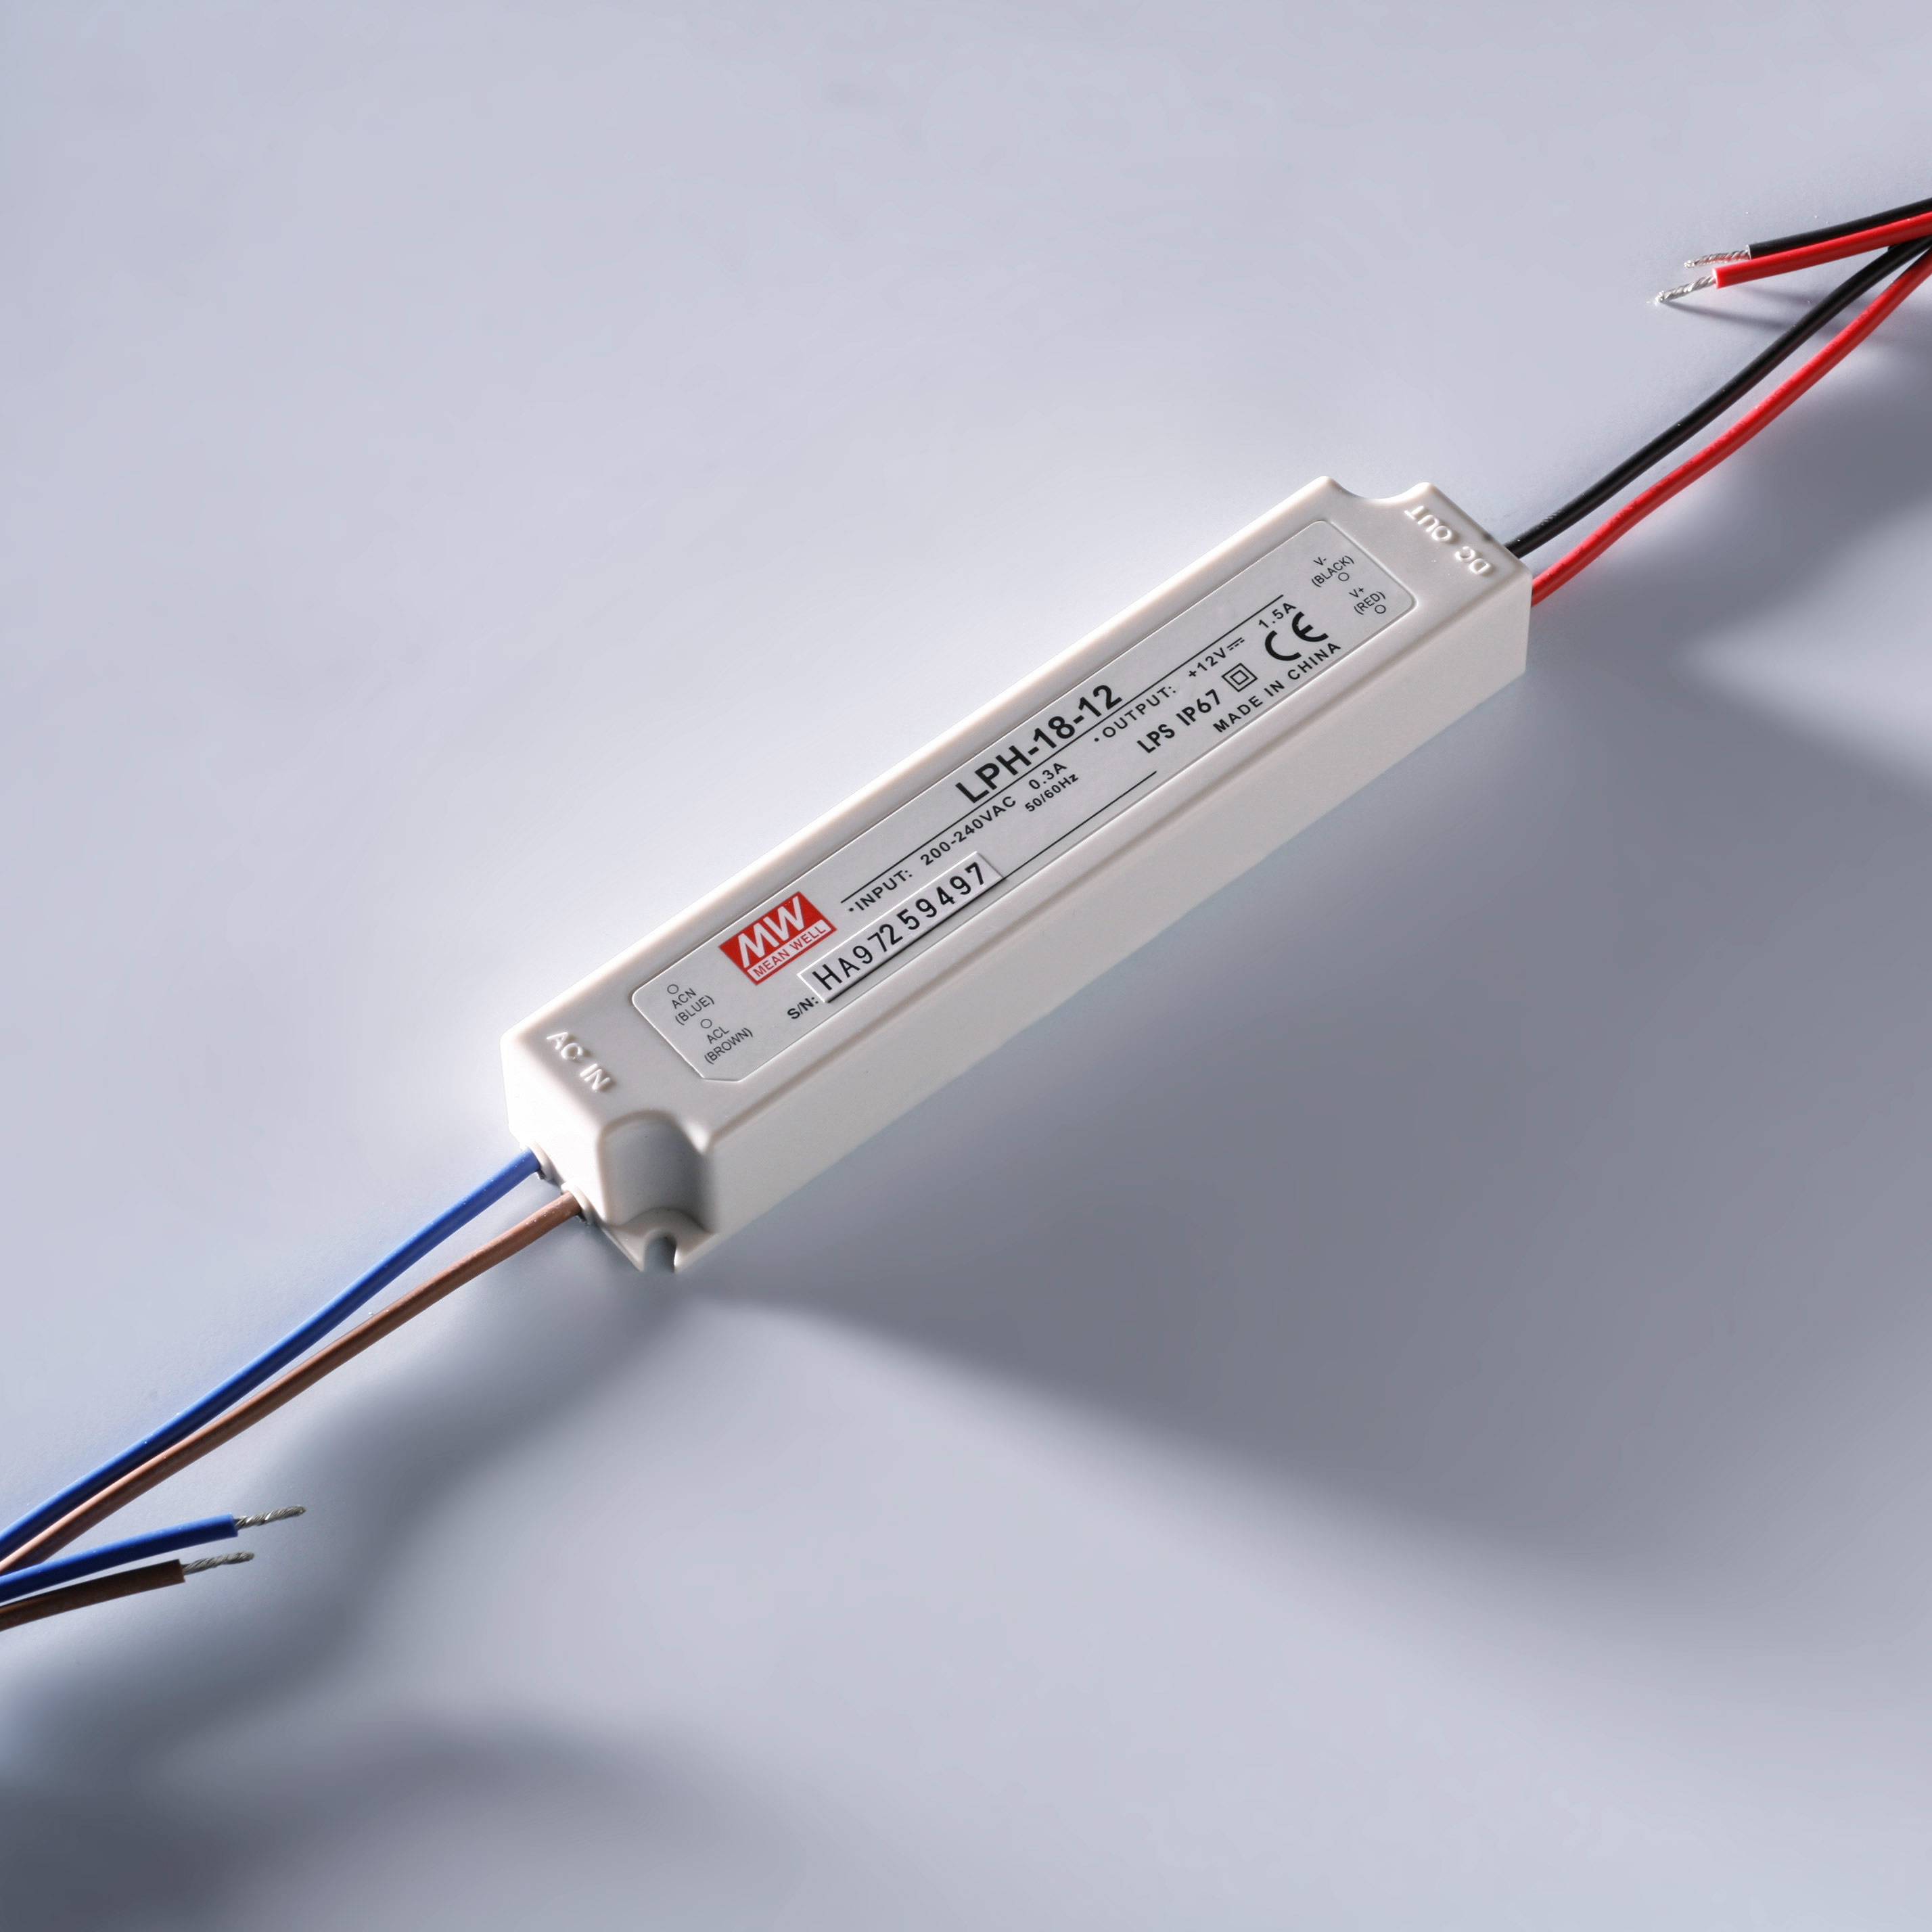 Driver LED a corrente costante MEAN WELL LPC-20-350 IP67 350mA 9 > 48V